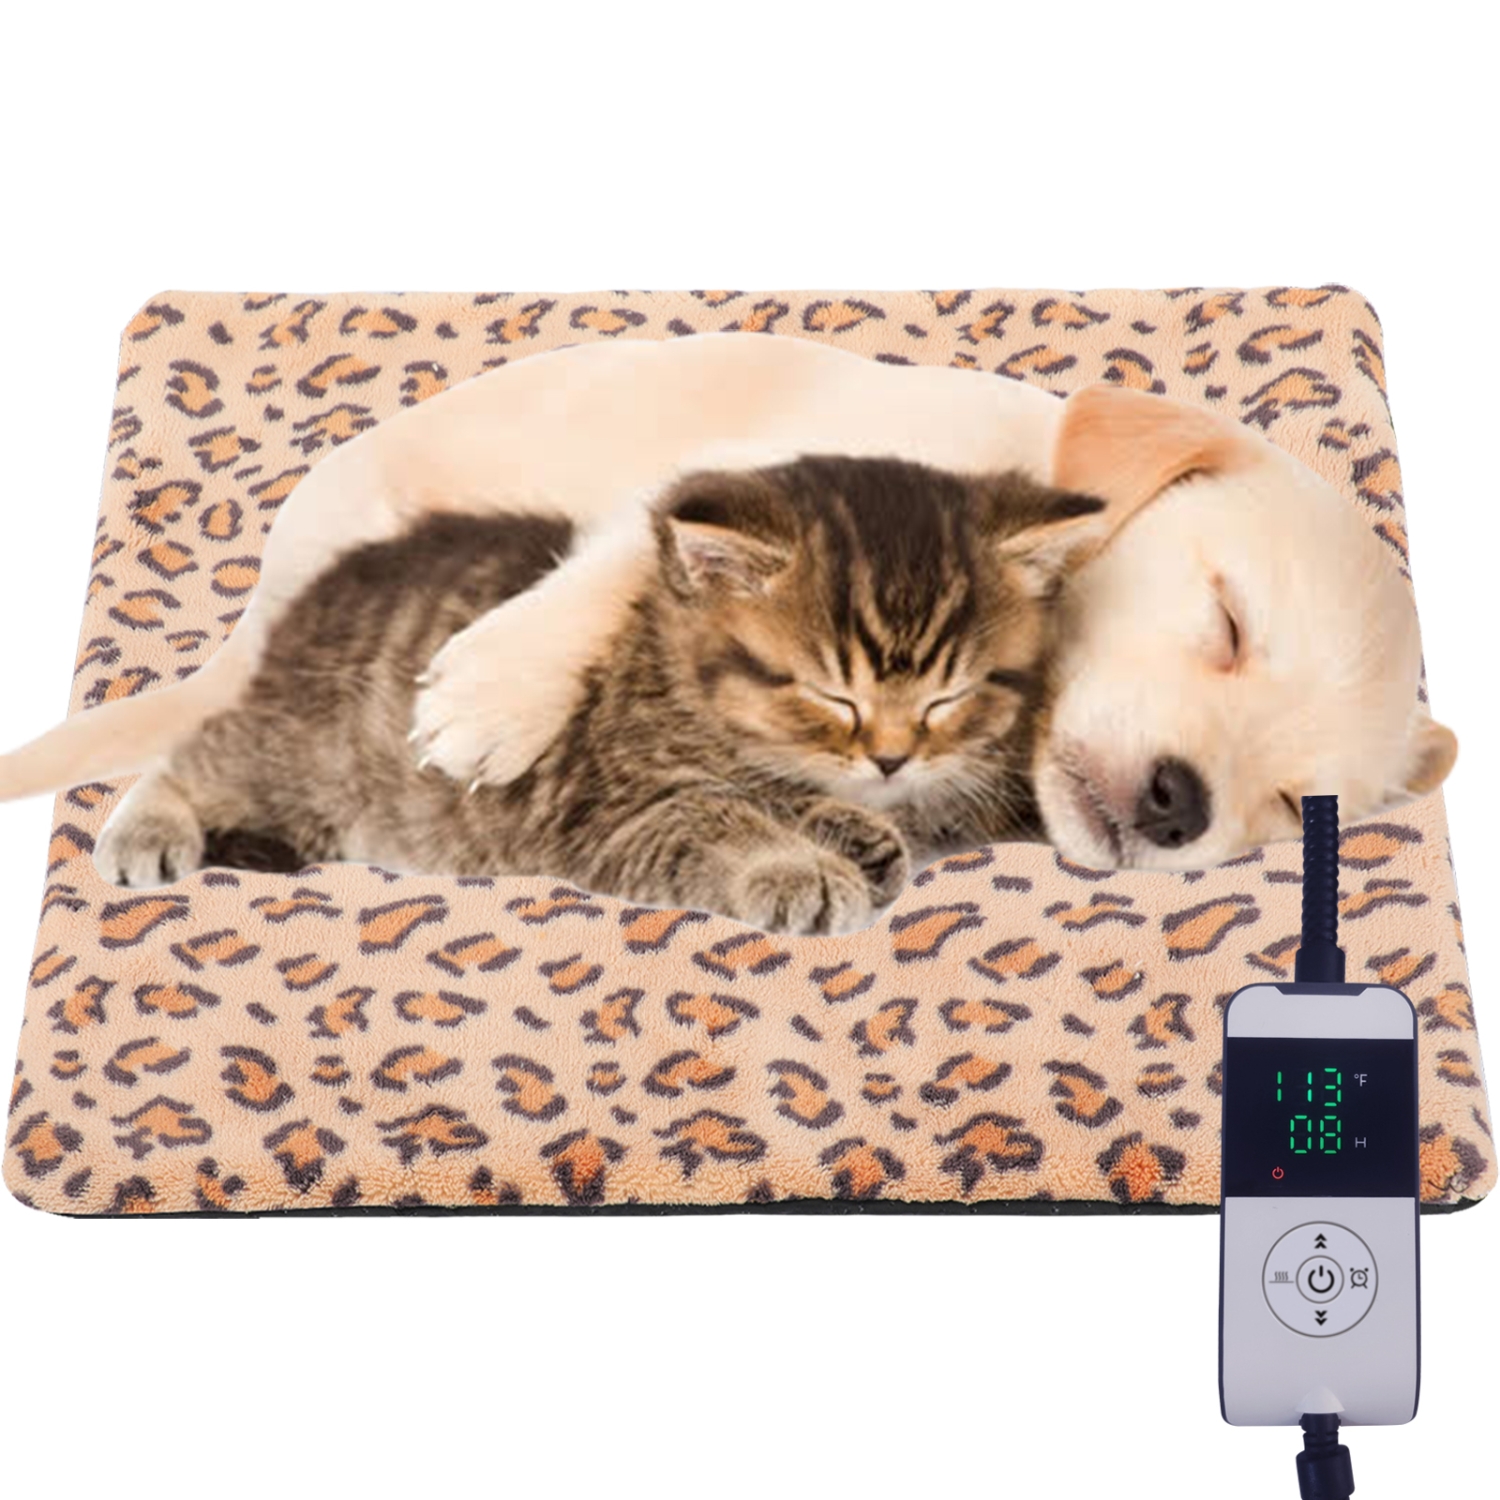 Pet heating pad for cat kitten dog puppies with auto on off fuction